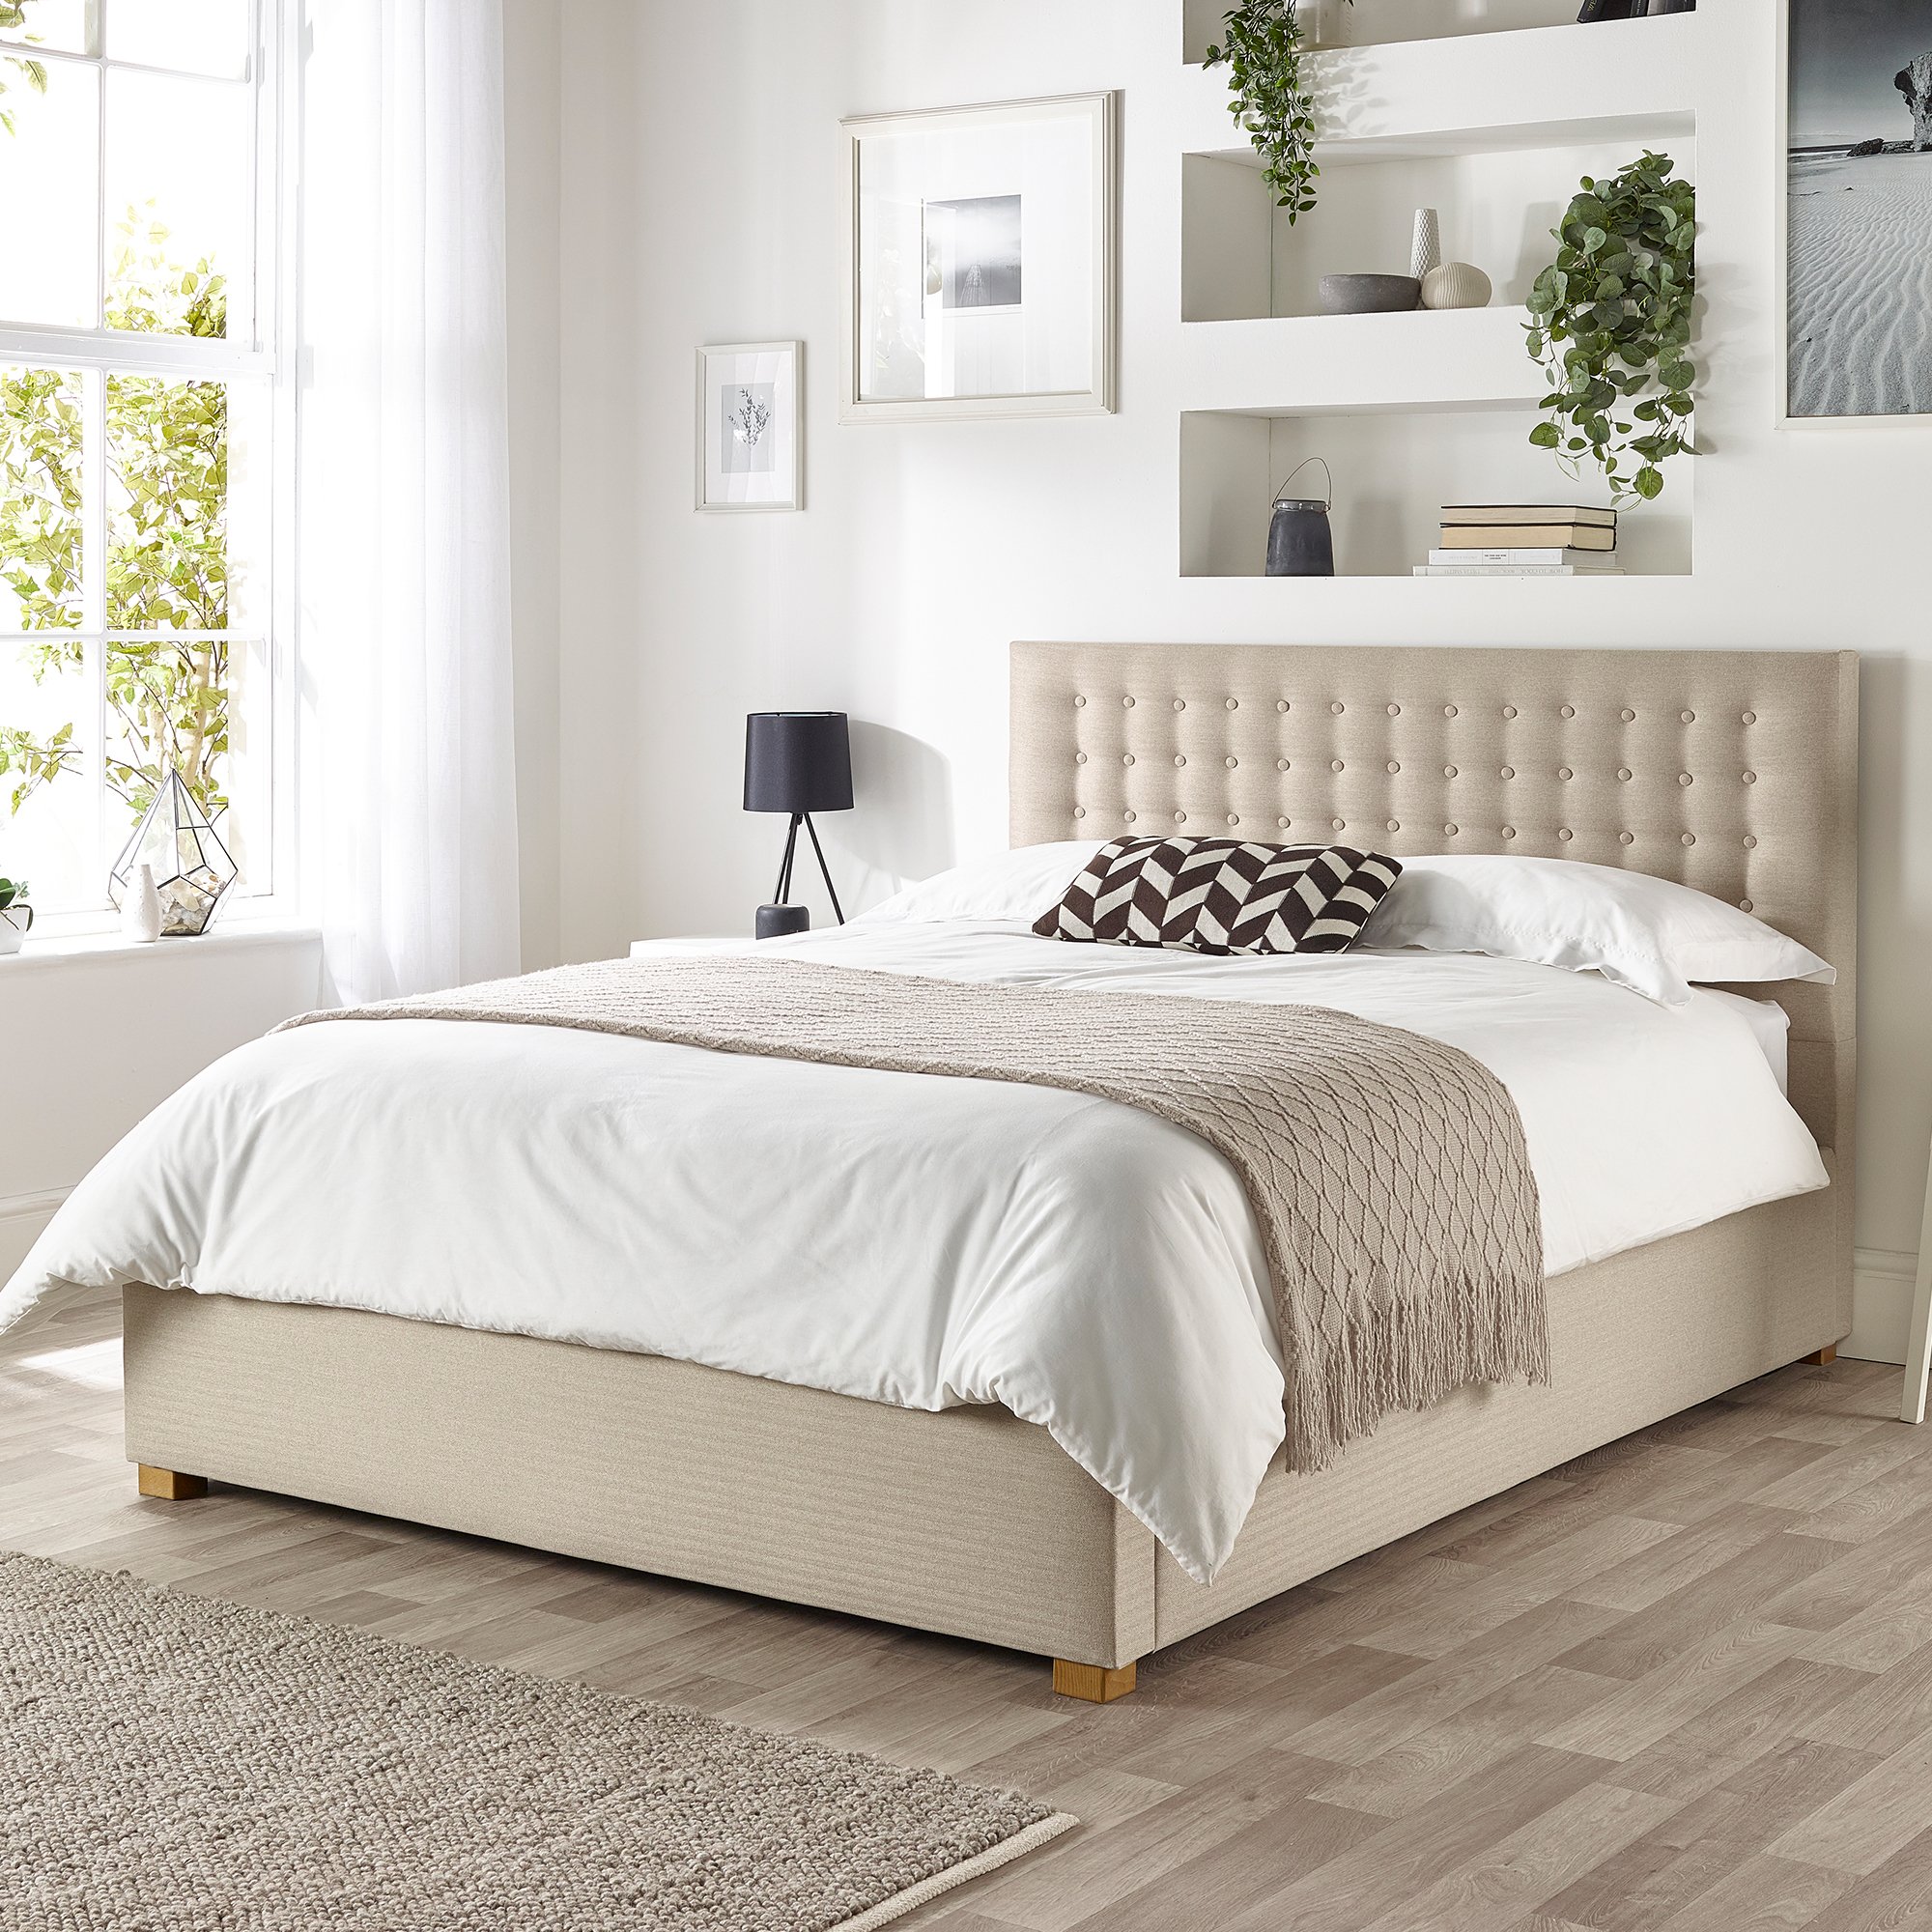 CL Opulence Twill Double Ottoman Bedframe - Natural